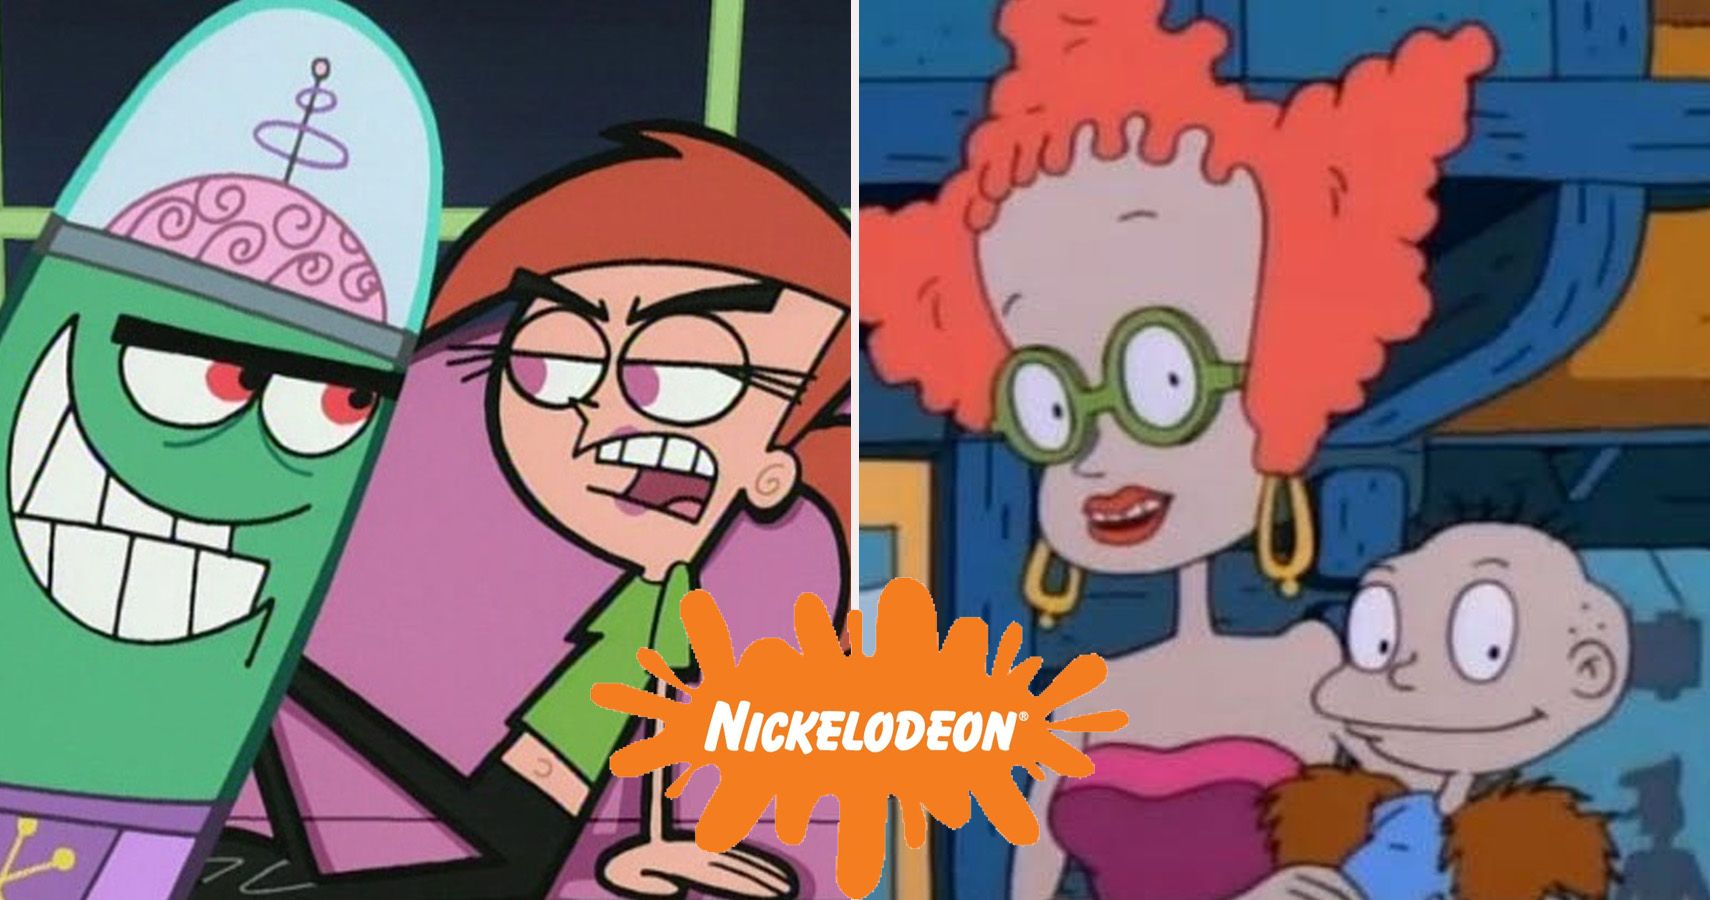 10 Nickelodeon Cartoons That Were Way Ahead Of Their Time